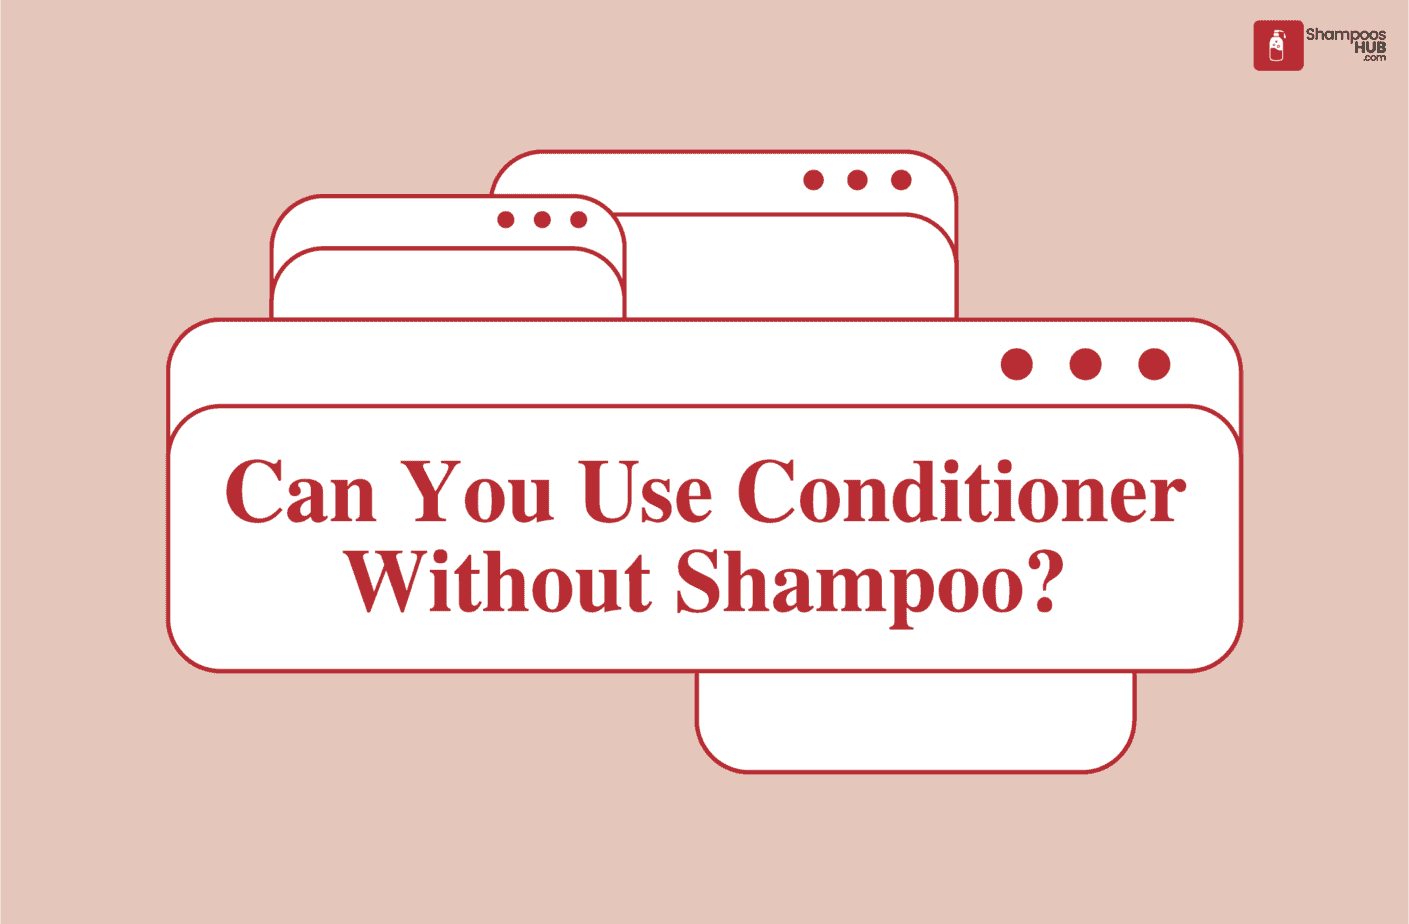 Can You Use Conditioner Without Shampoo?